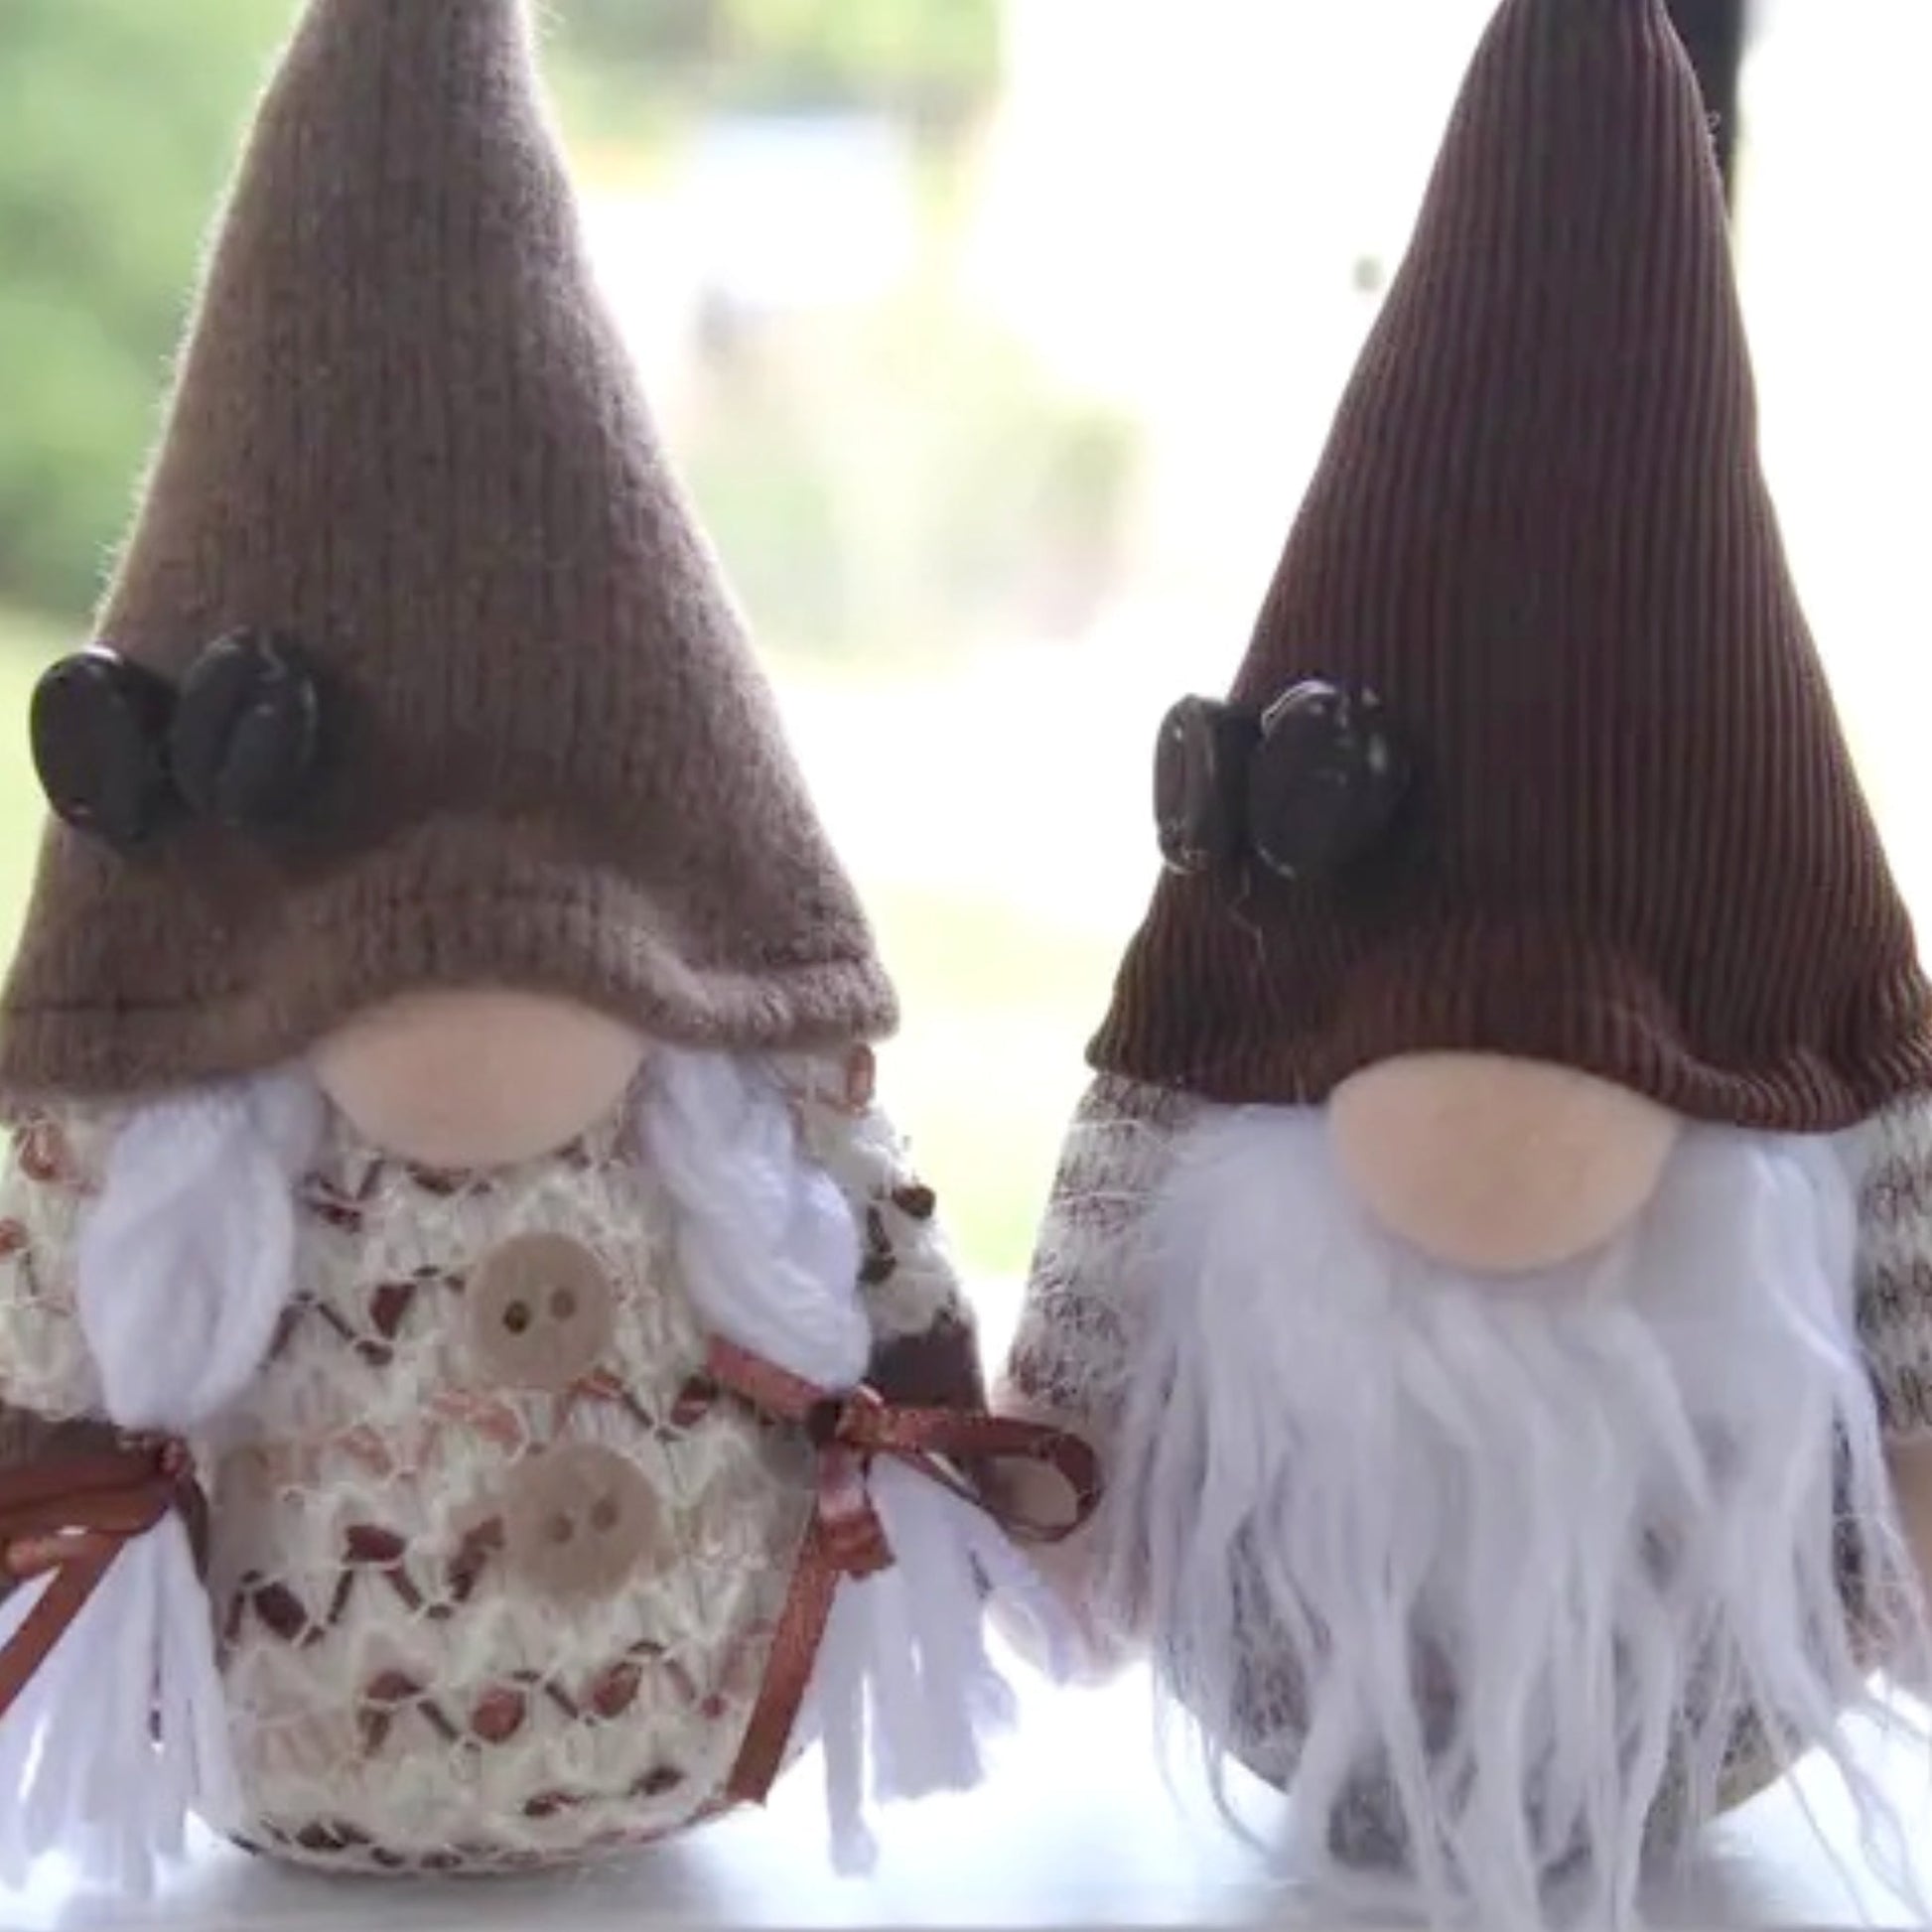 Pair of Handmade Coffee Gnomes Brother and Sister - Made in the USA